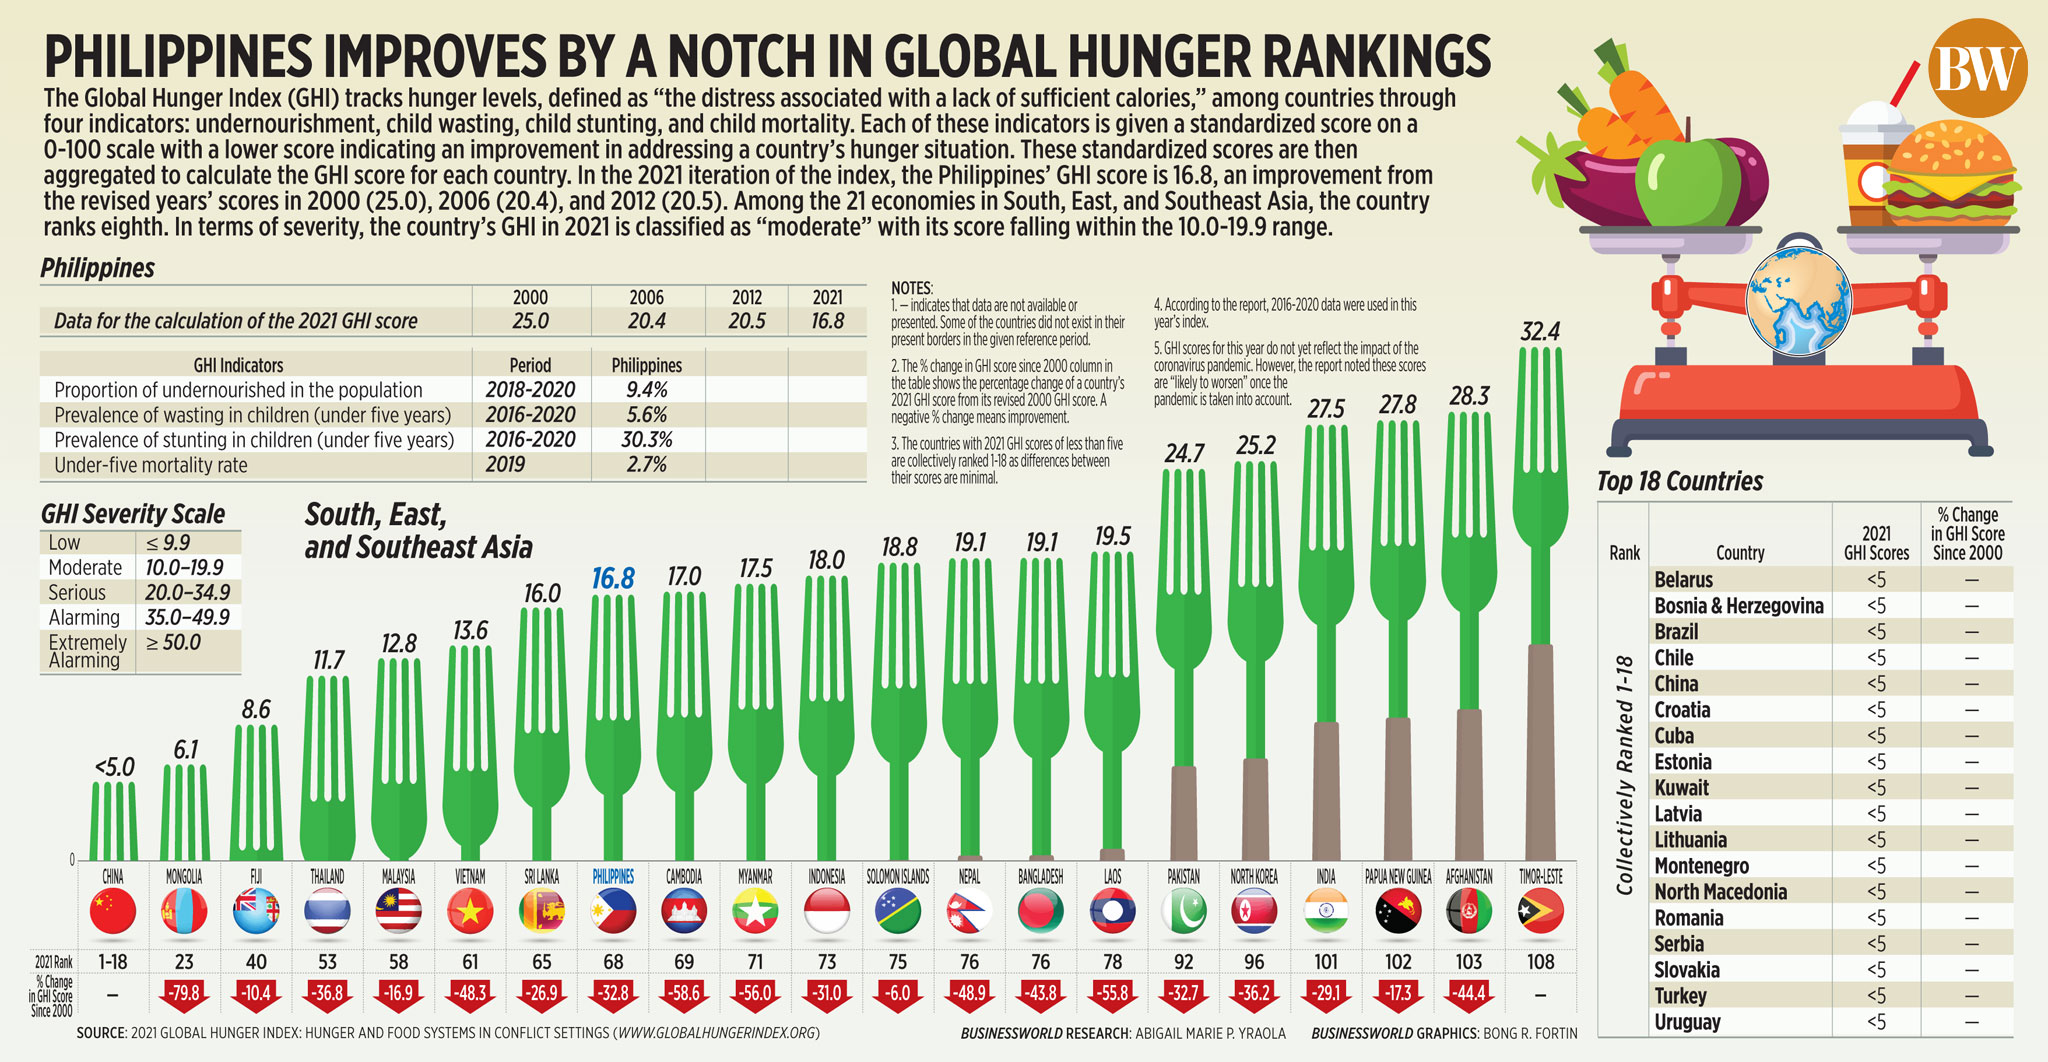 Philippines improves by a notch in global hunger rankings